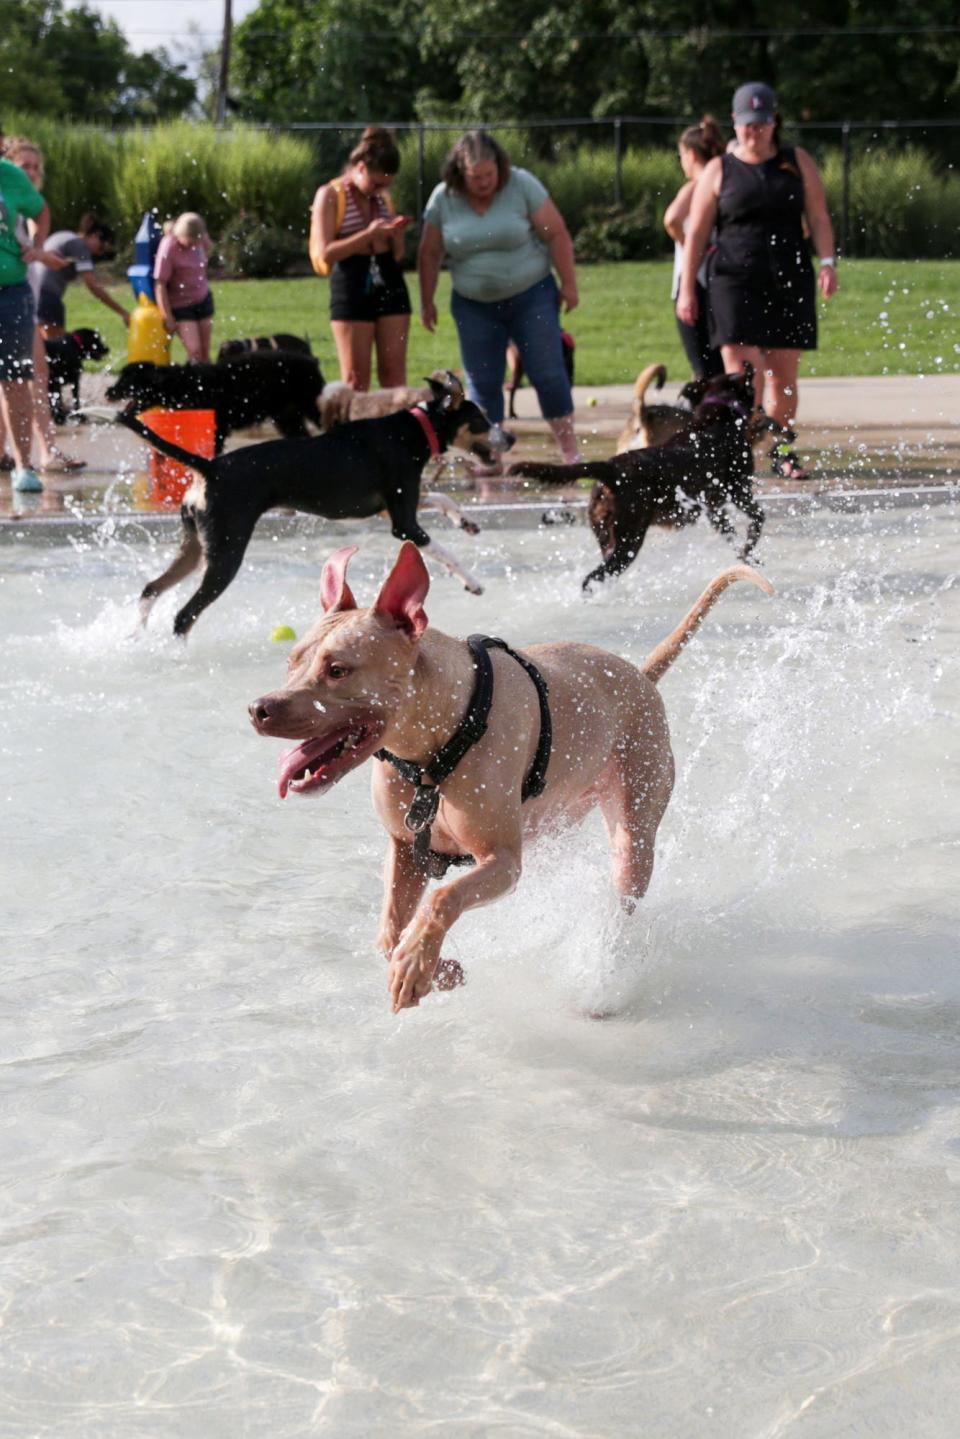 A dog runs through the pool during the 10th annual Pooch Plunge at Castaway Bay, Tuesday, Aug. 10, 2021 in Lafayette.